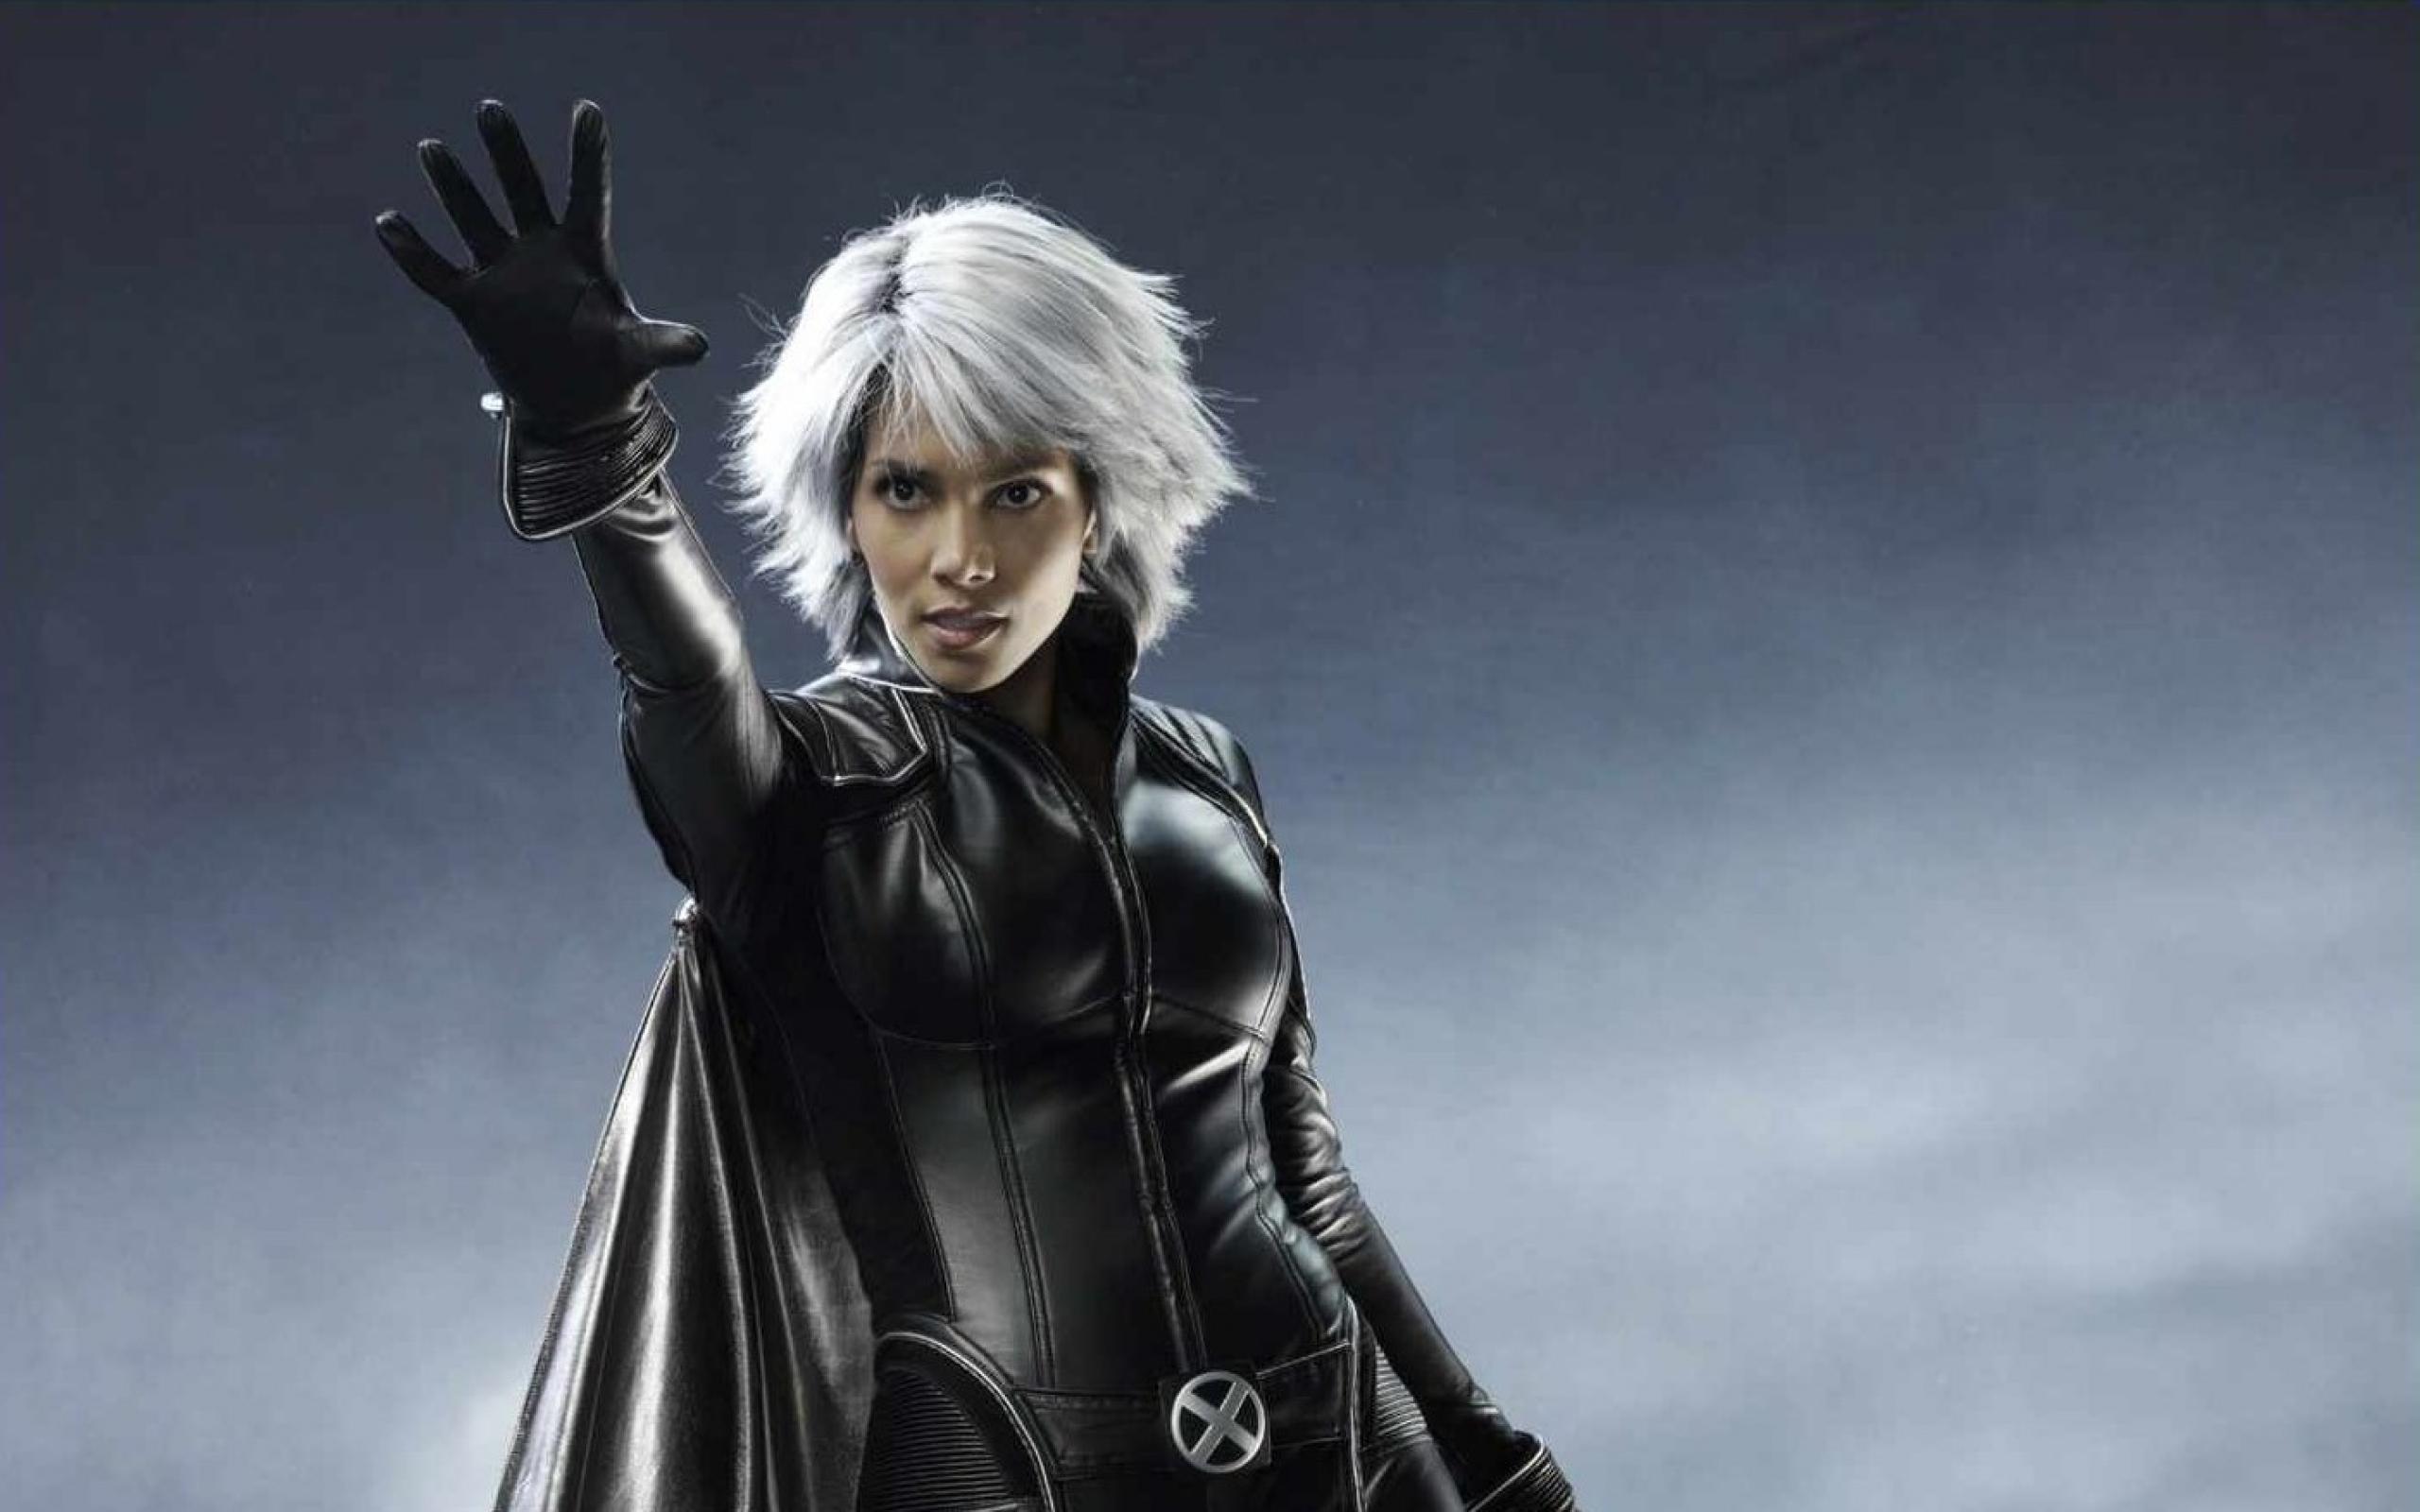 Movie News: Halle Berry is returning for X-Men: Days of Future Past